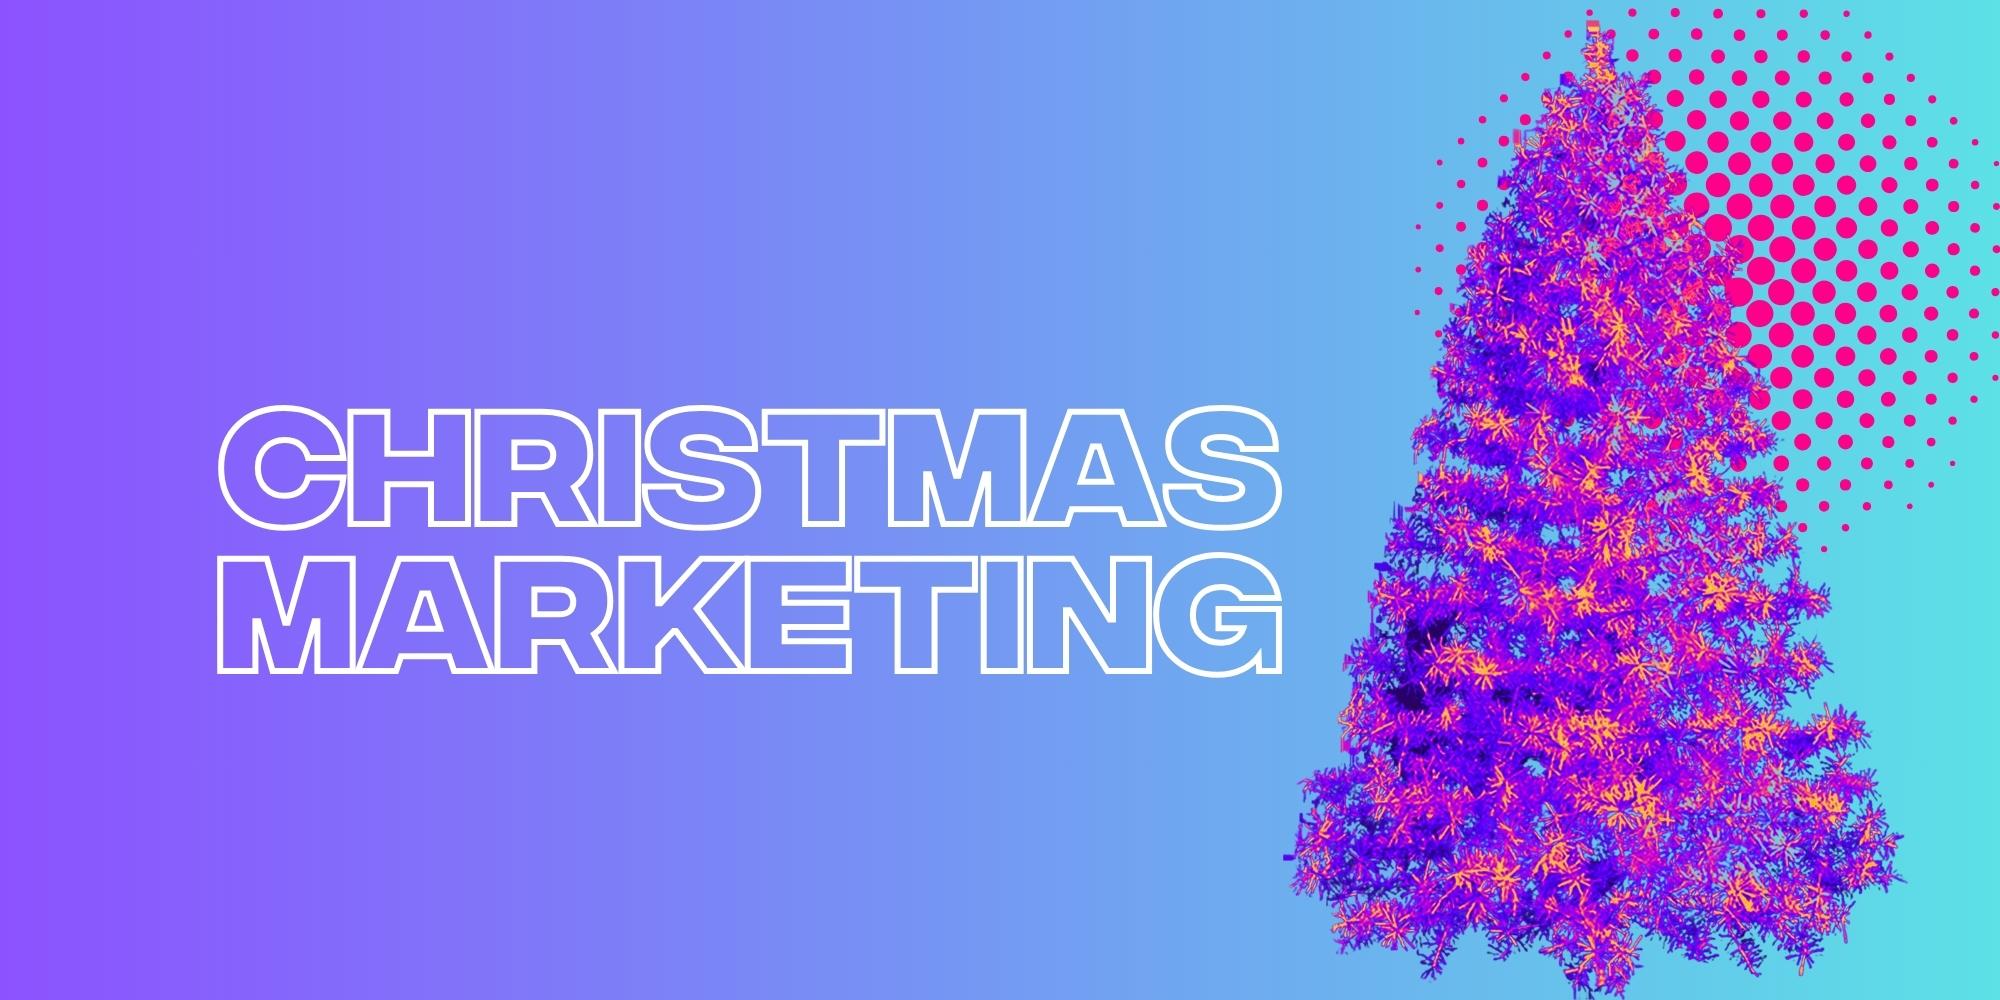 How Can Brands Make The Most Of Christmas on TikTok?